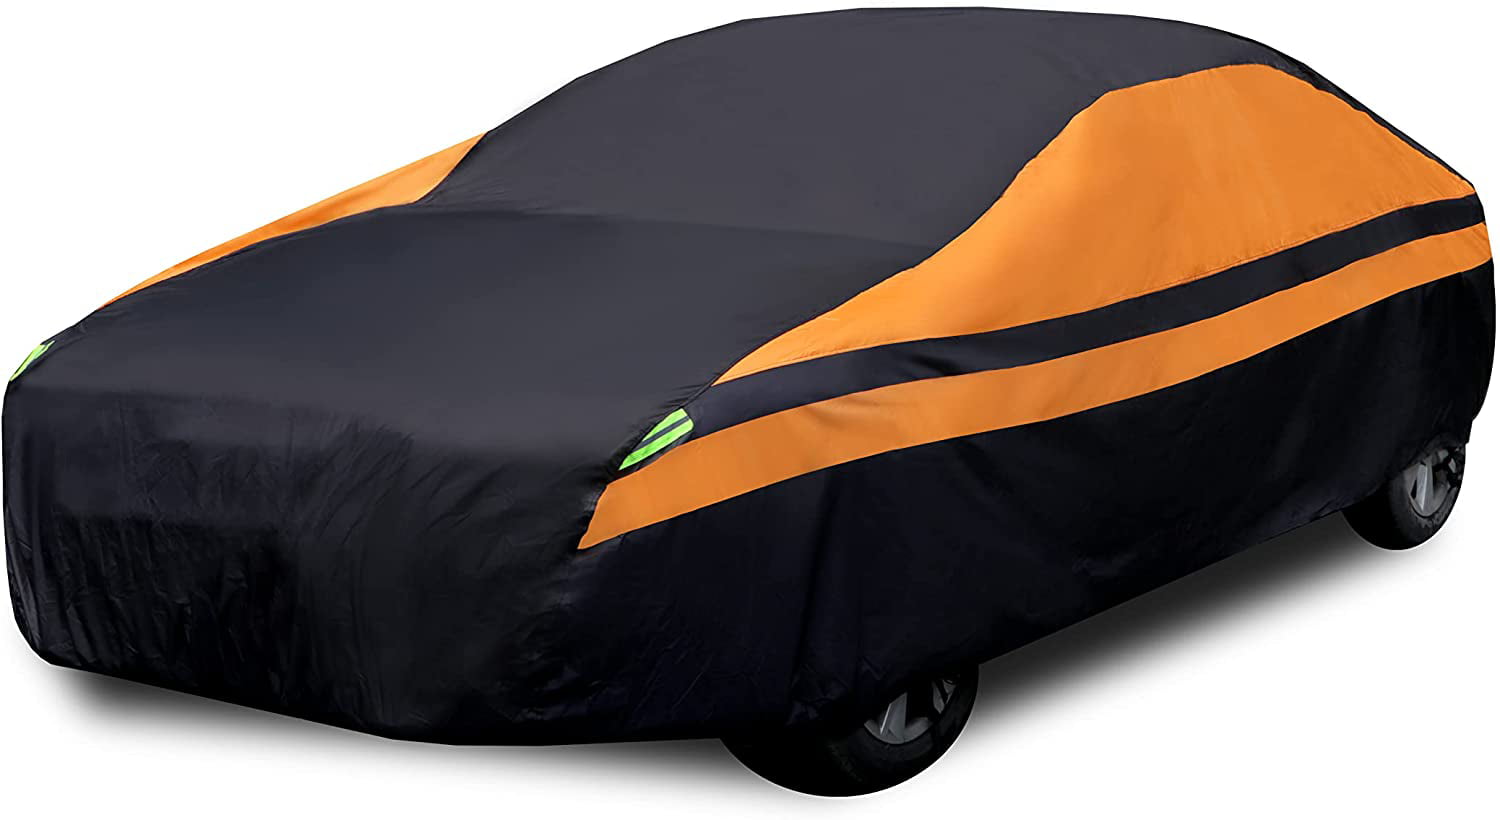 RUN STAR Car Covers for Sedan Automobiles Car Cover Waterproof All Weather 6 Layers with Zipper Door UV Sun Protection Windproof Rainproof Universal Fit Sedan L Length 185 Inch 